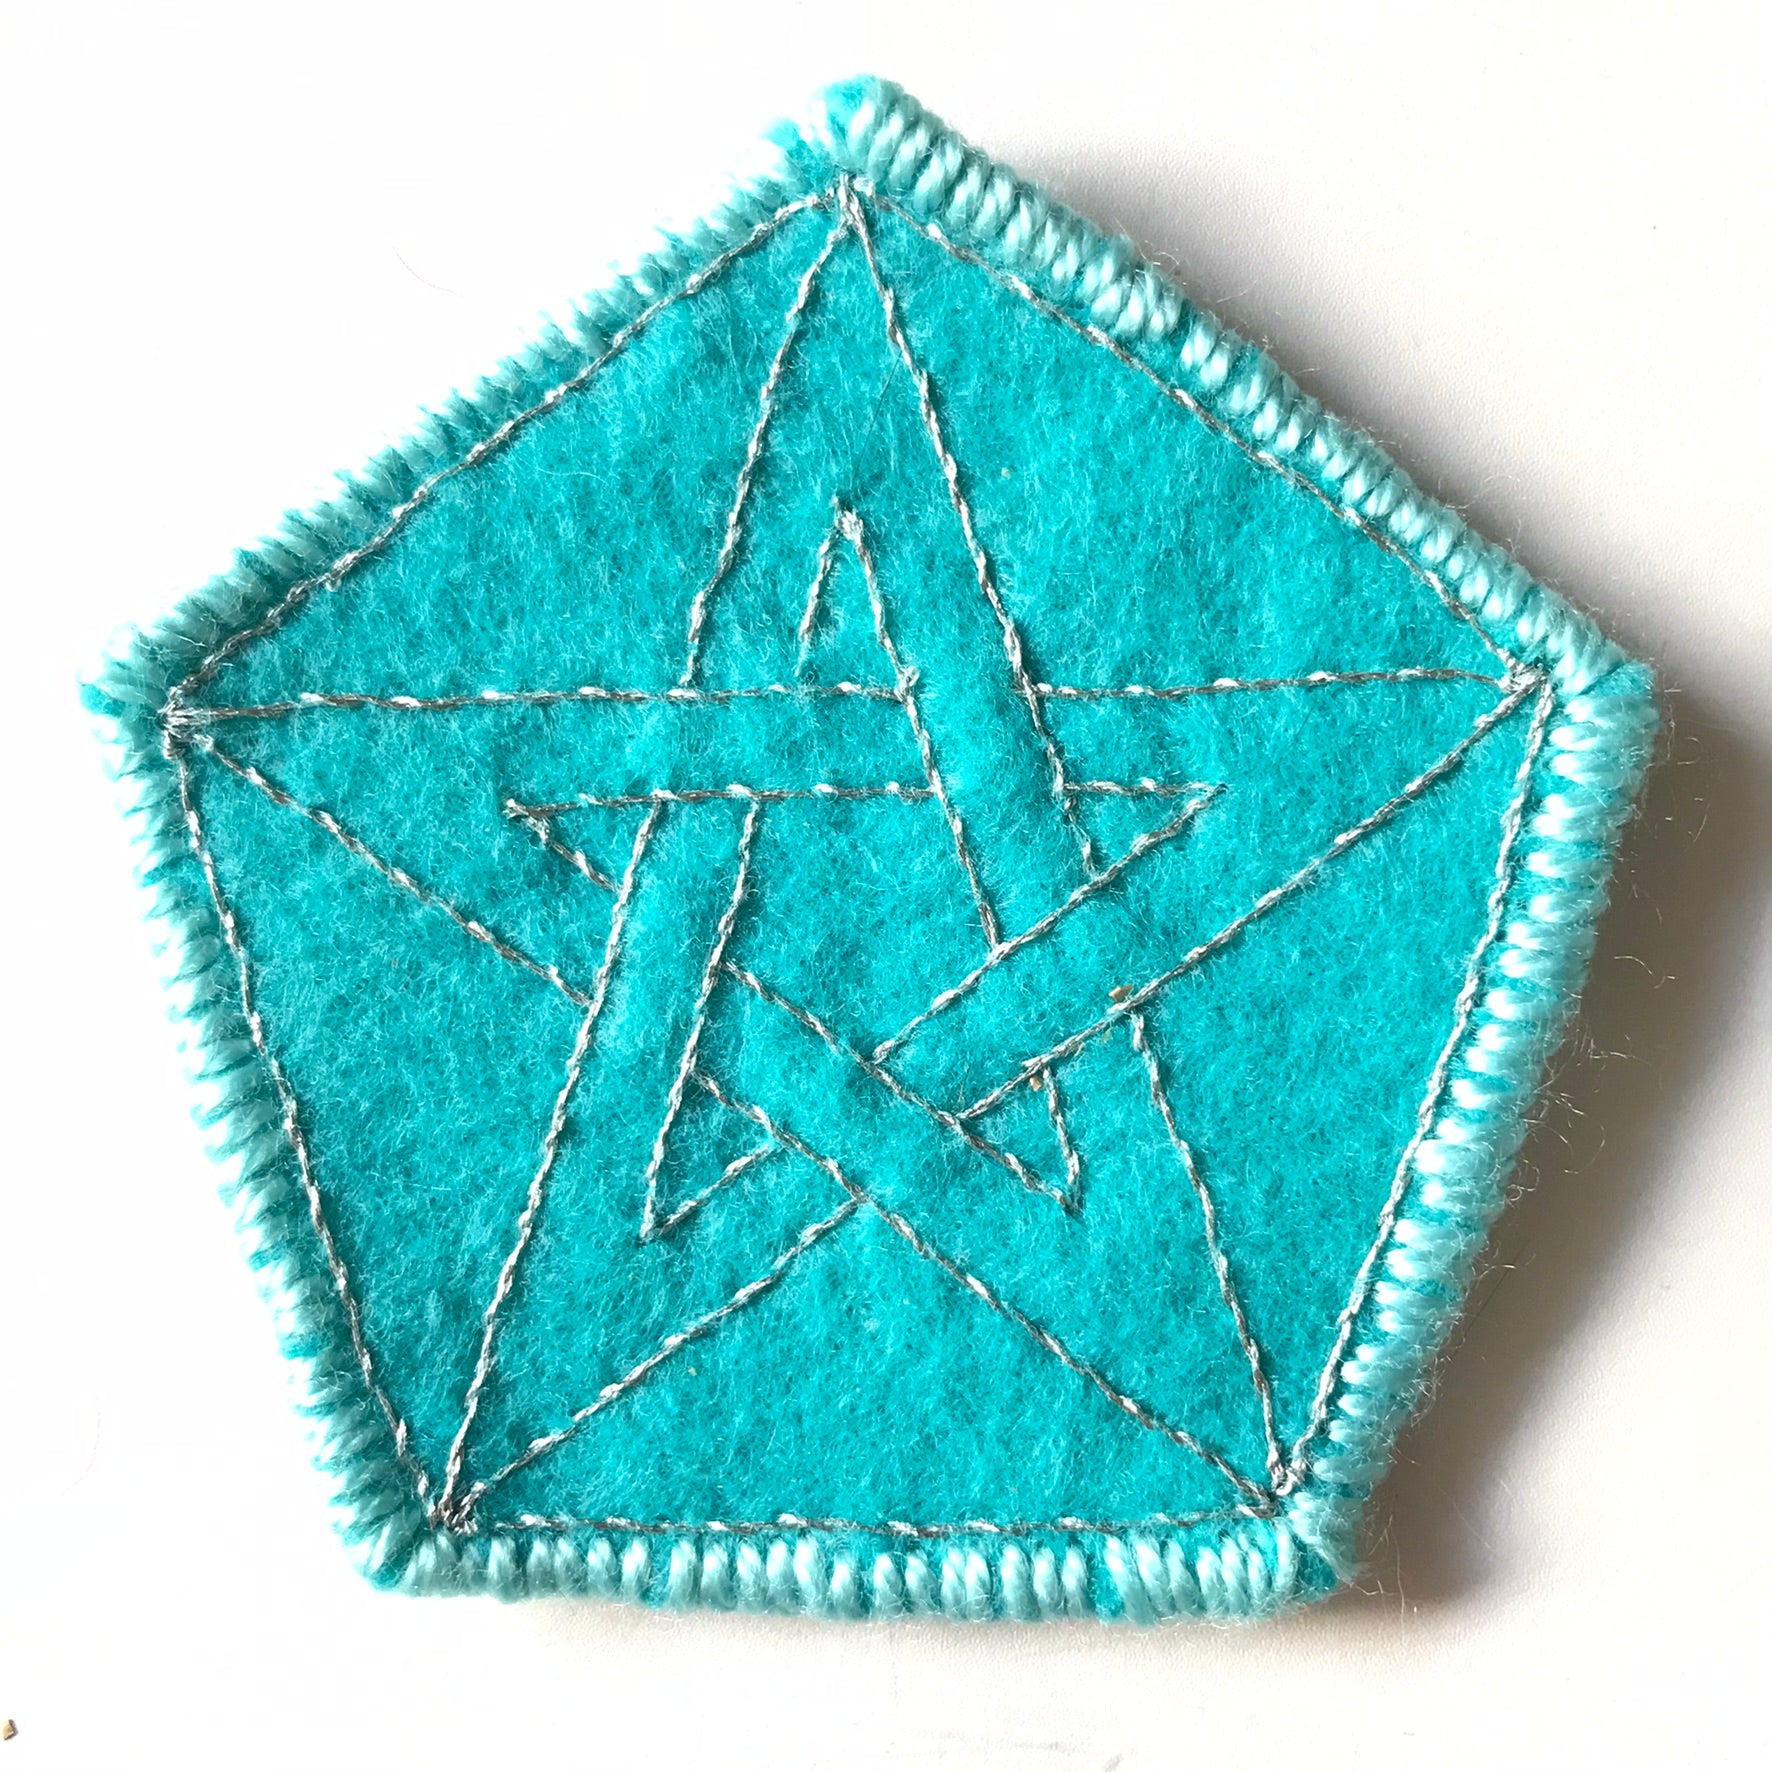 PENTACLE, TURQUOISE FELT & SILVER METAL THREAD EMBROIDERED PROTECTION PATCHES, MINI TRAVEL CRYSTAL CHARGERS, ALTER PIECES